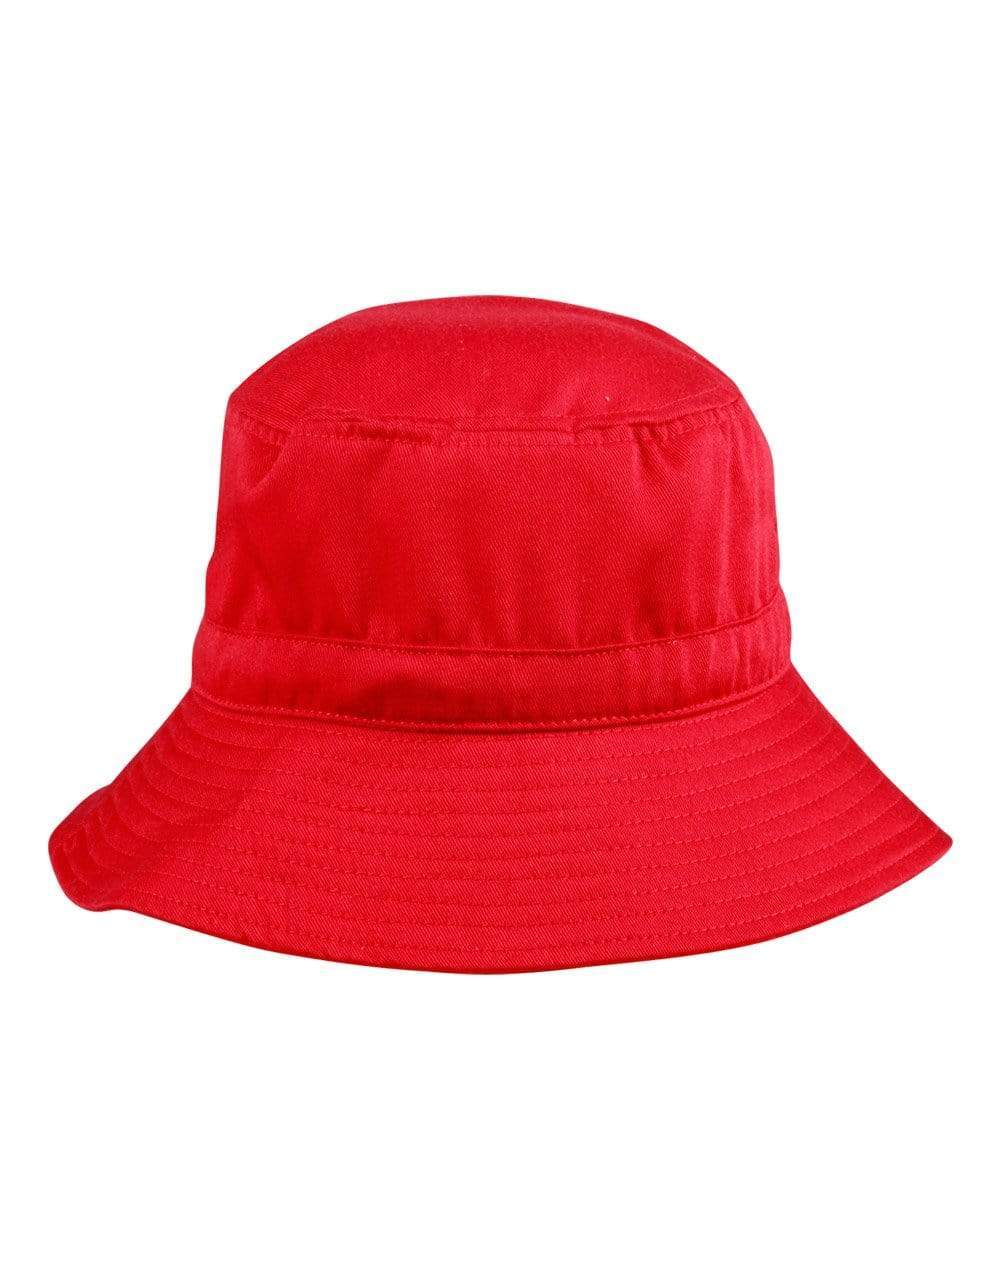 Bucket Hat With Toggle H1034 Active Wear Winning Spirit Red S/M 